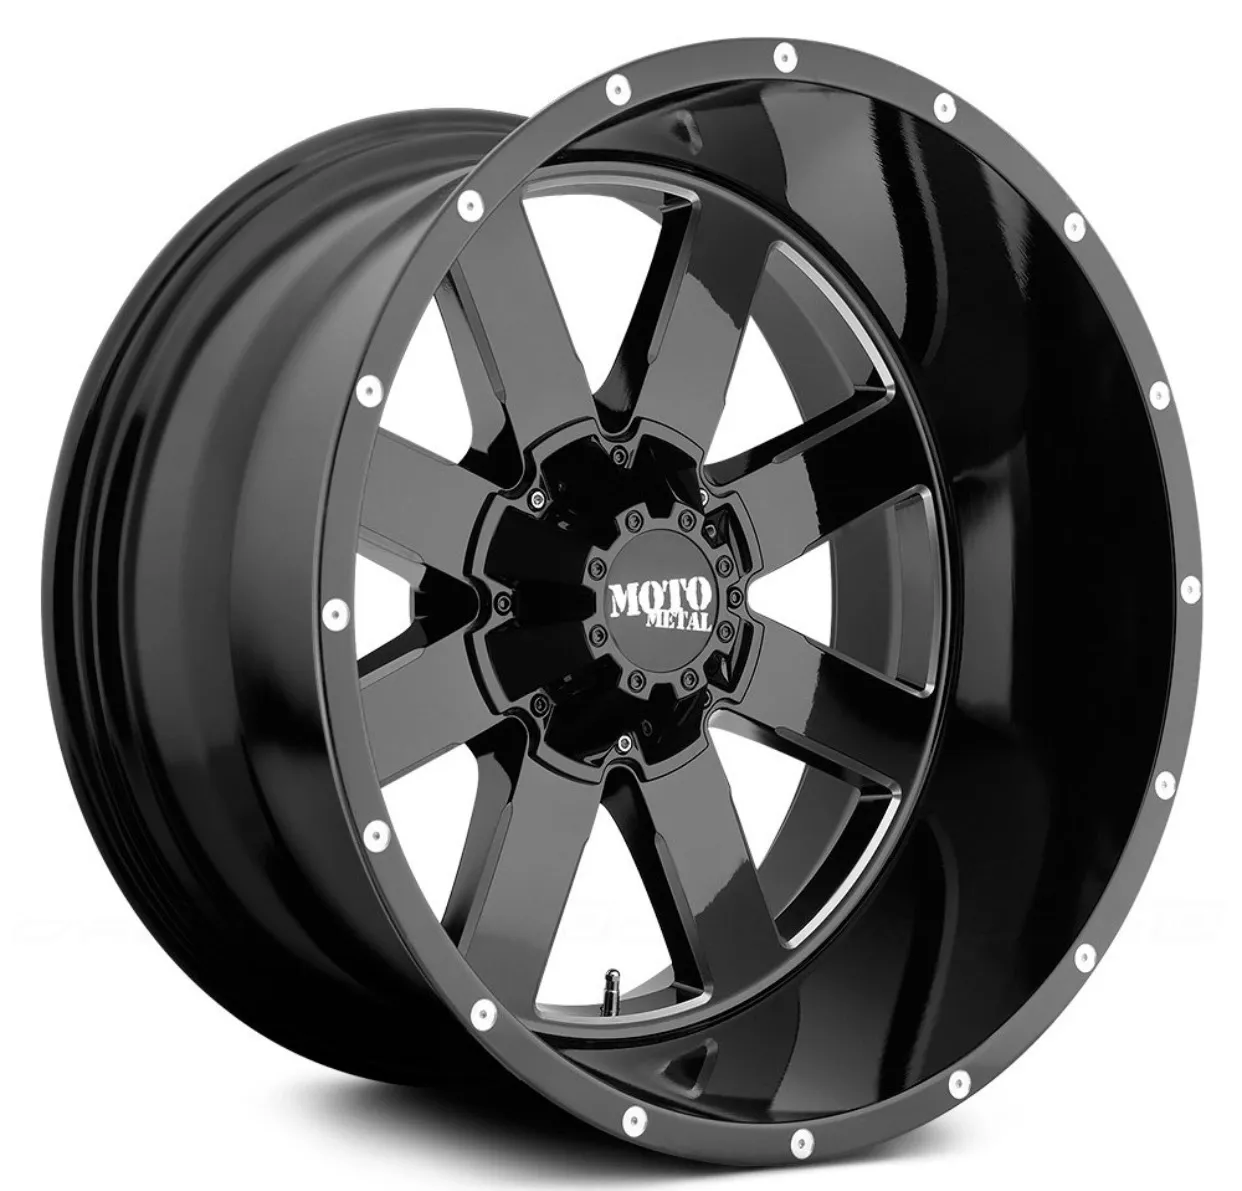 A black truck rim with white accents on it.